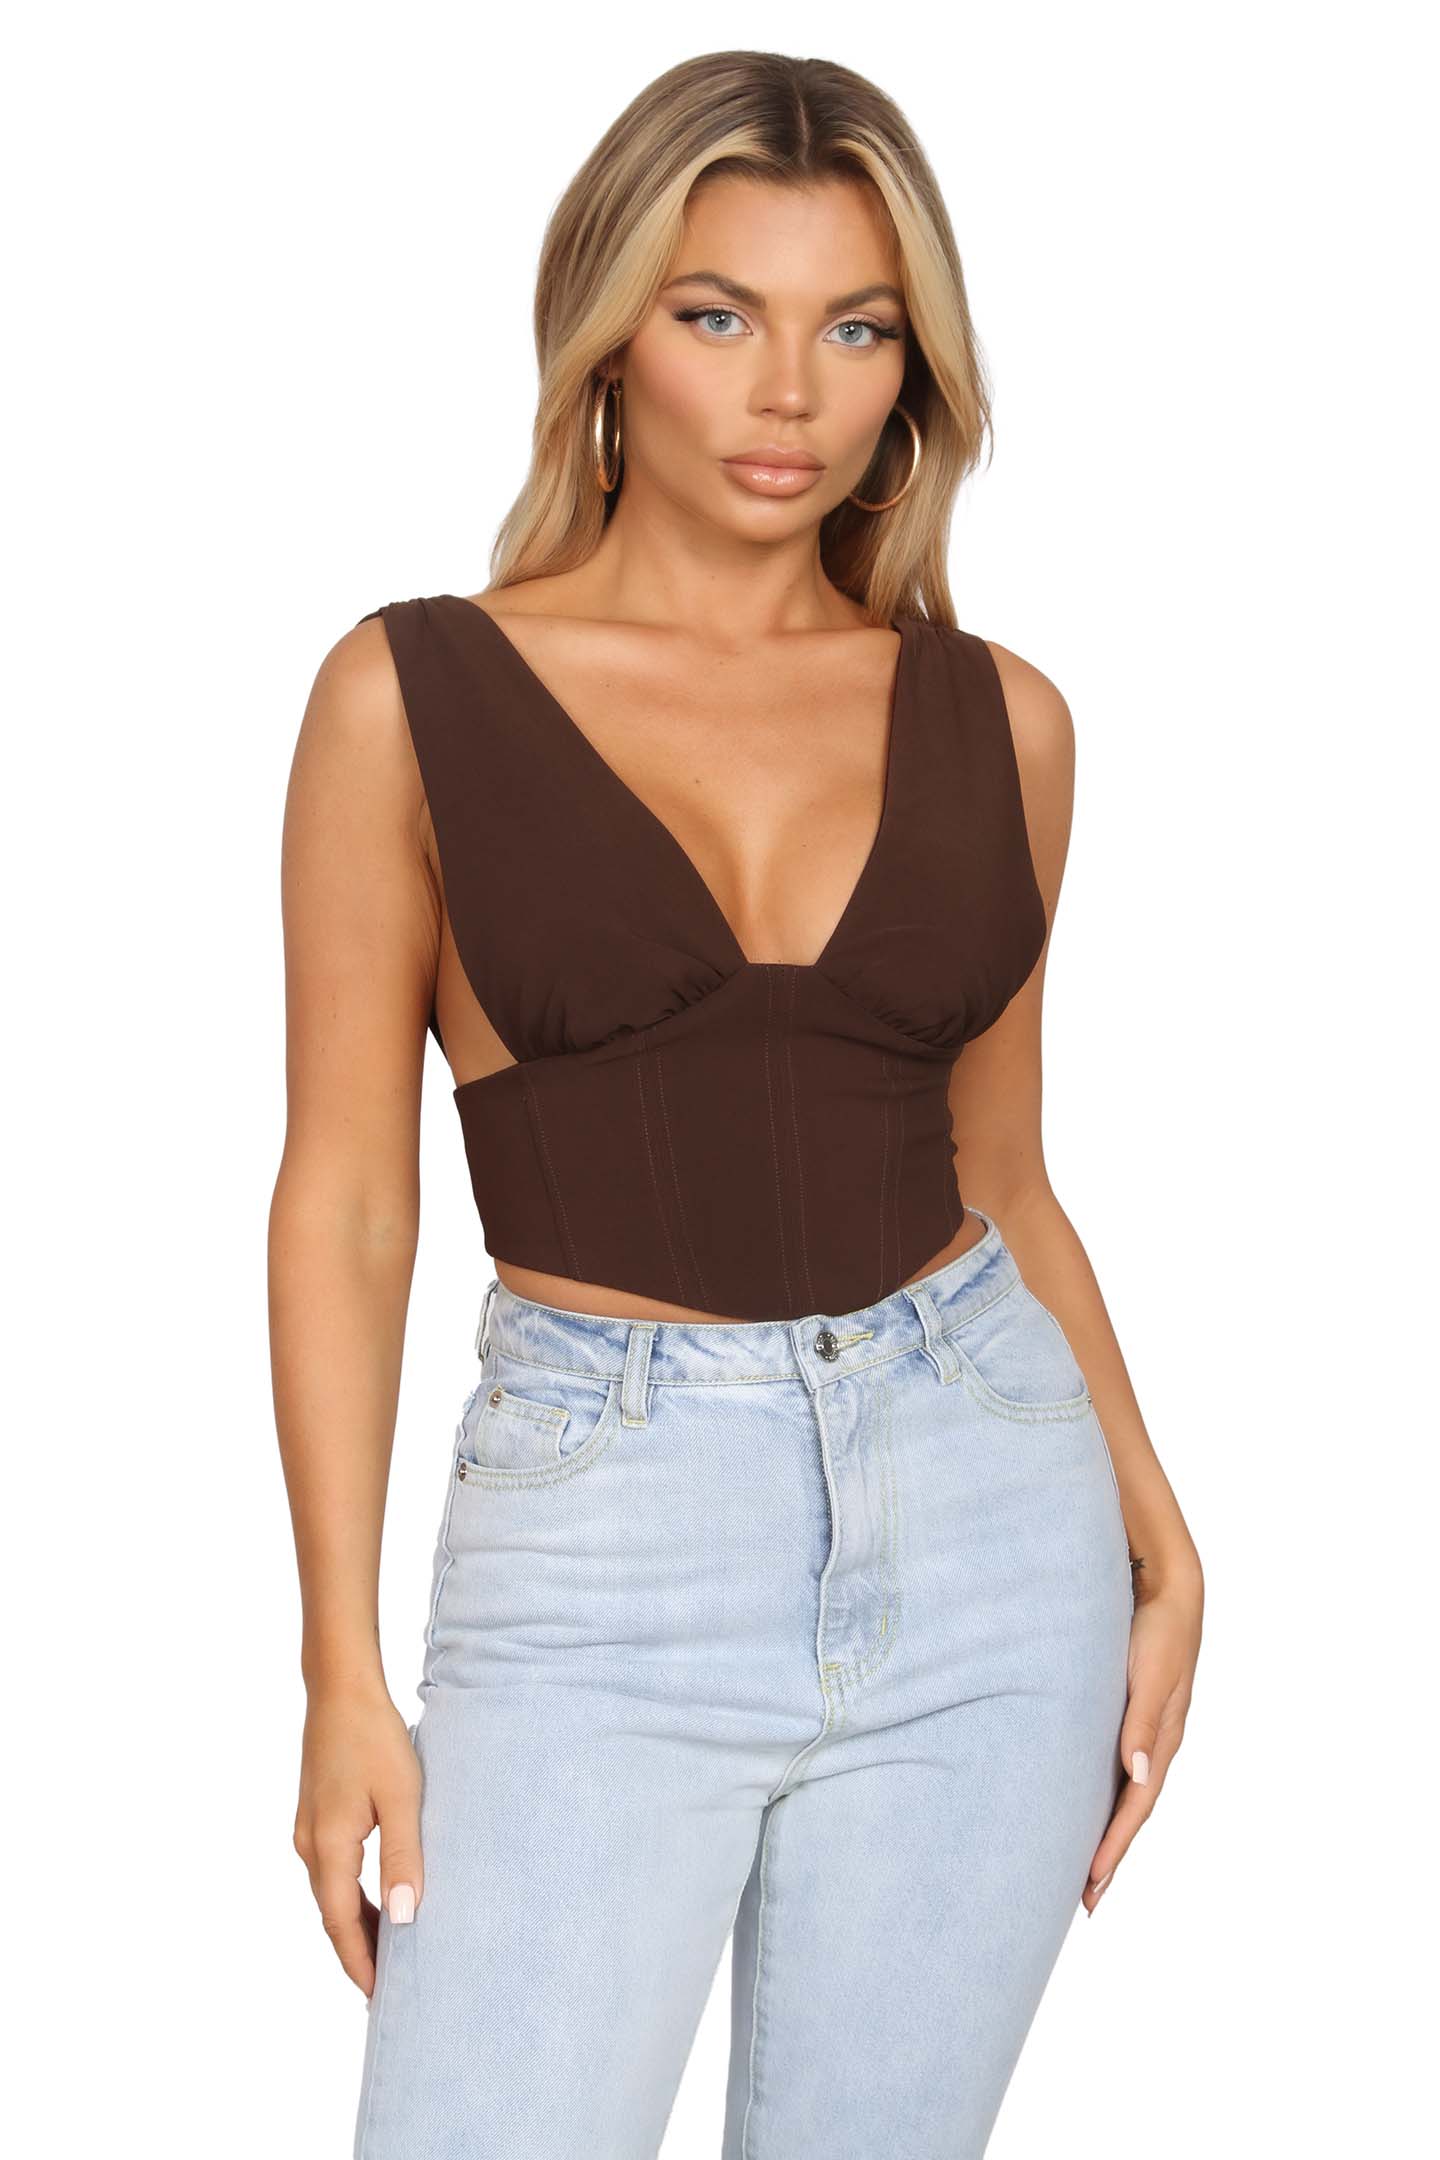 Model wearing the Canes Brown Crop Top, showcasing the deep V-neck plunge detail and stylish design.